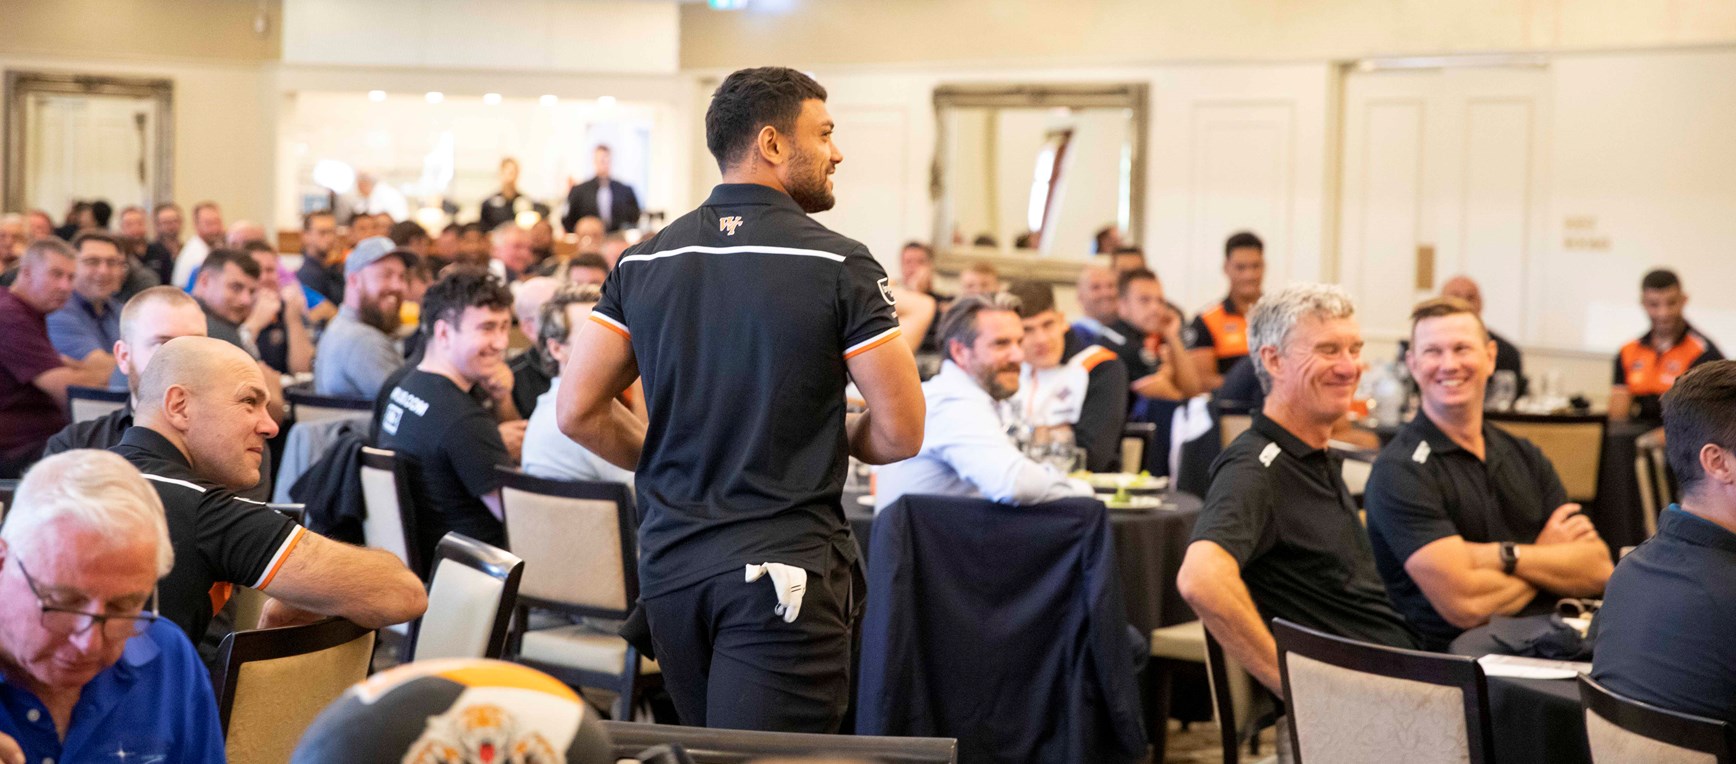 Wests Tigers Golf Day function